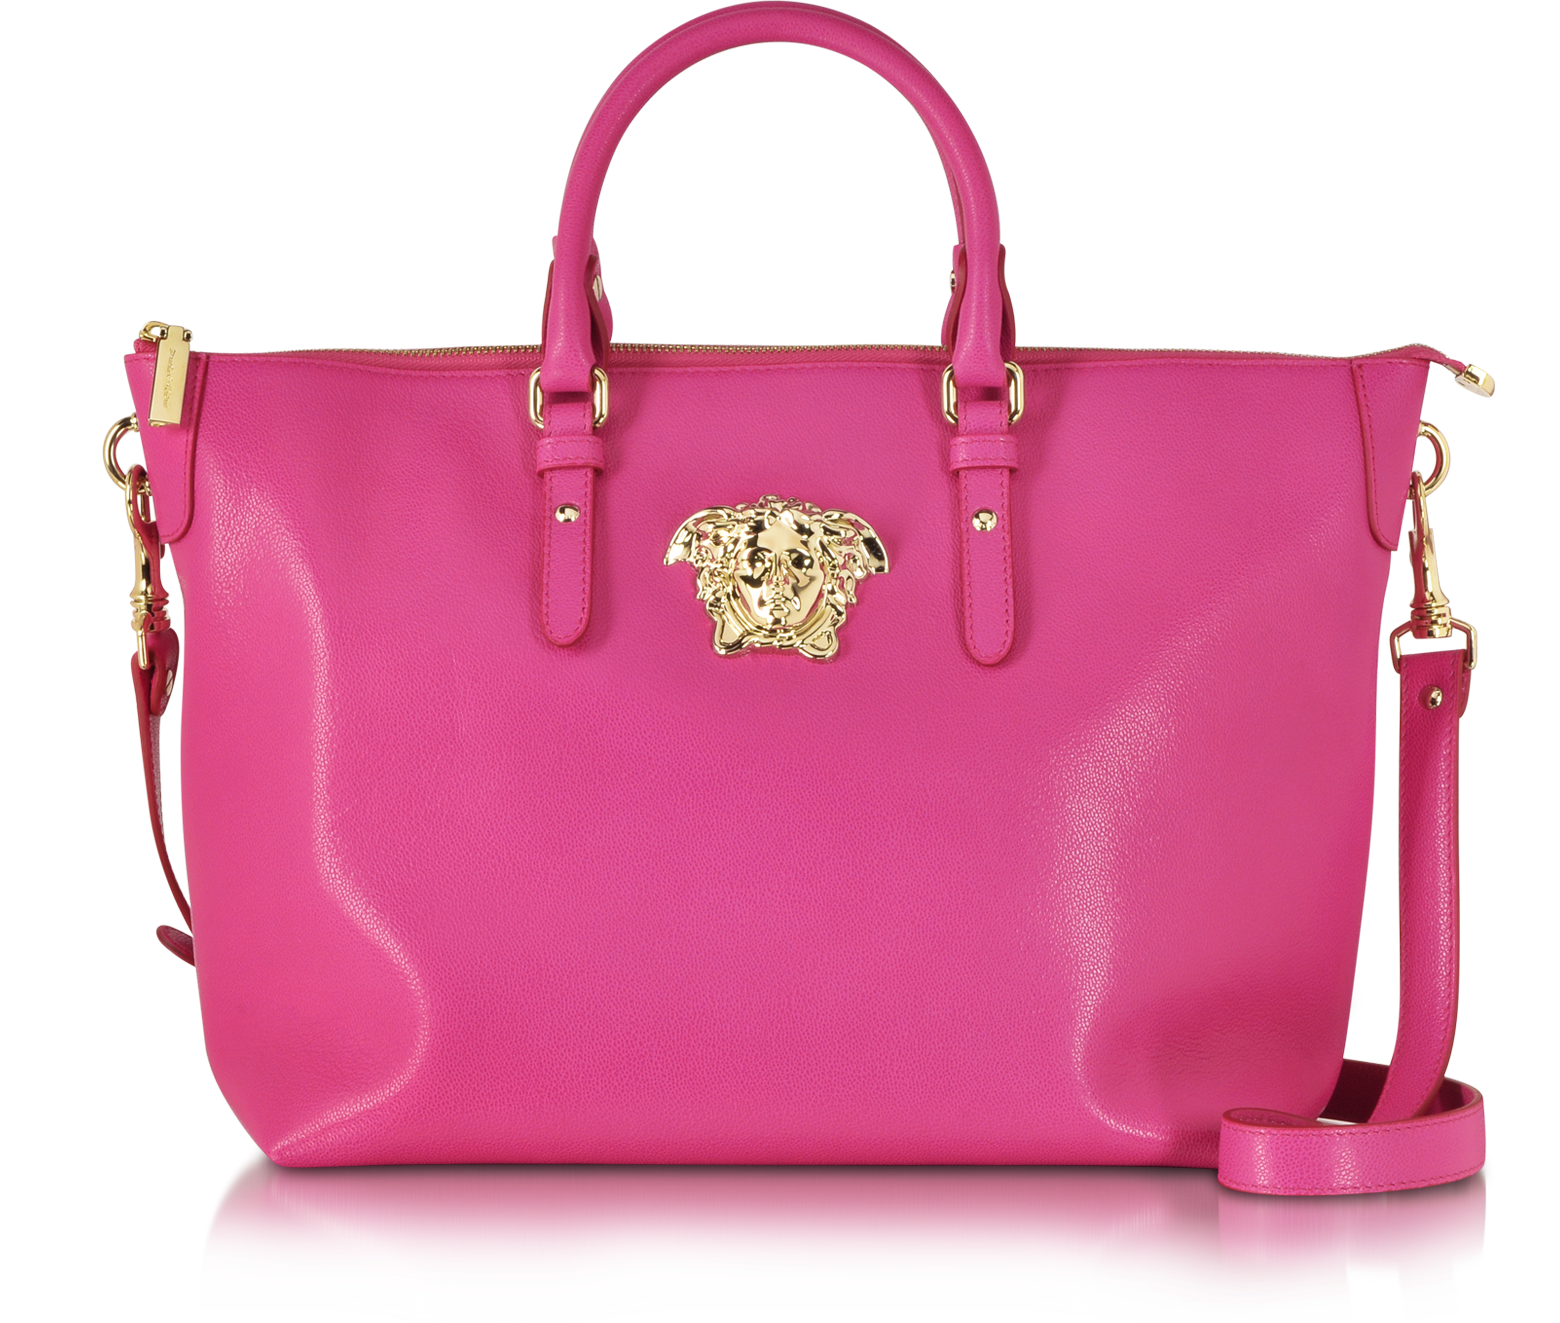 Versace Palazzo Small Marilyn Pink Leather Tote Bag at FORZIERI